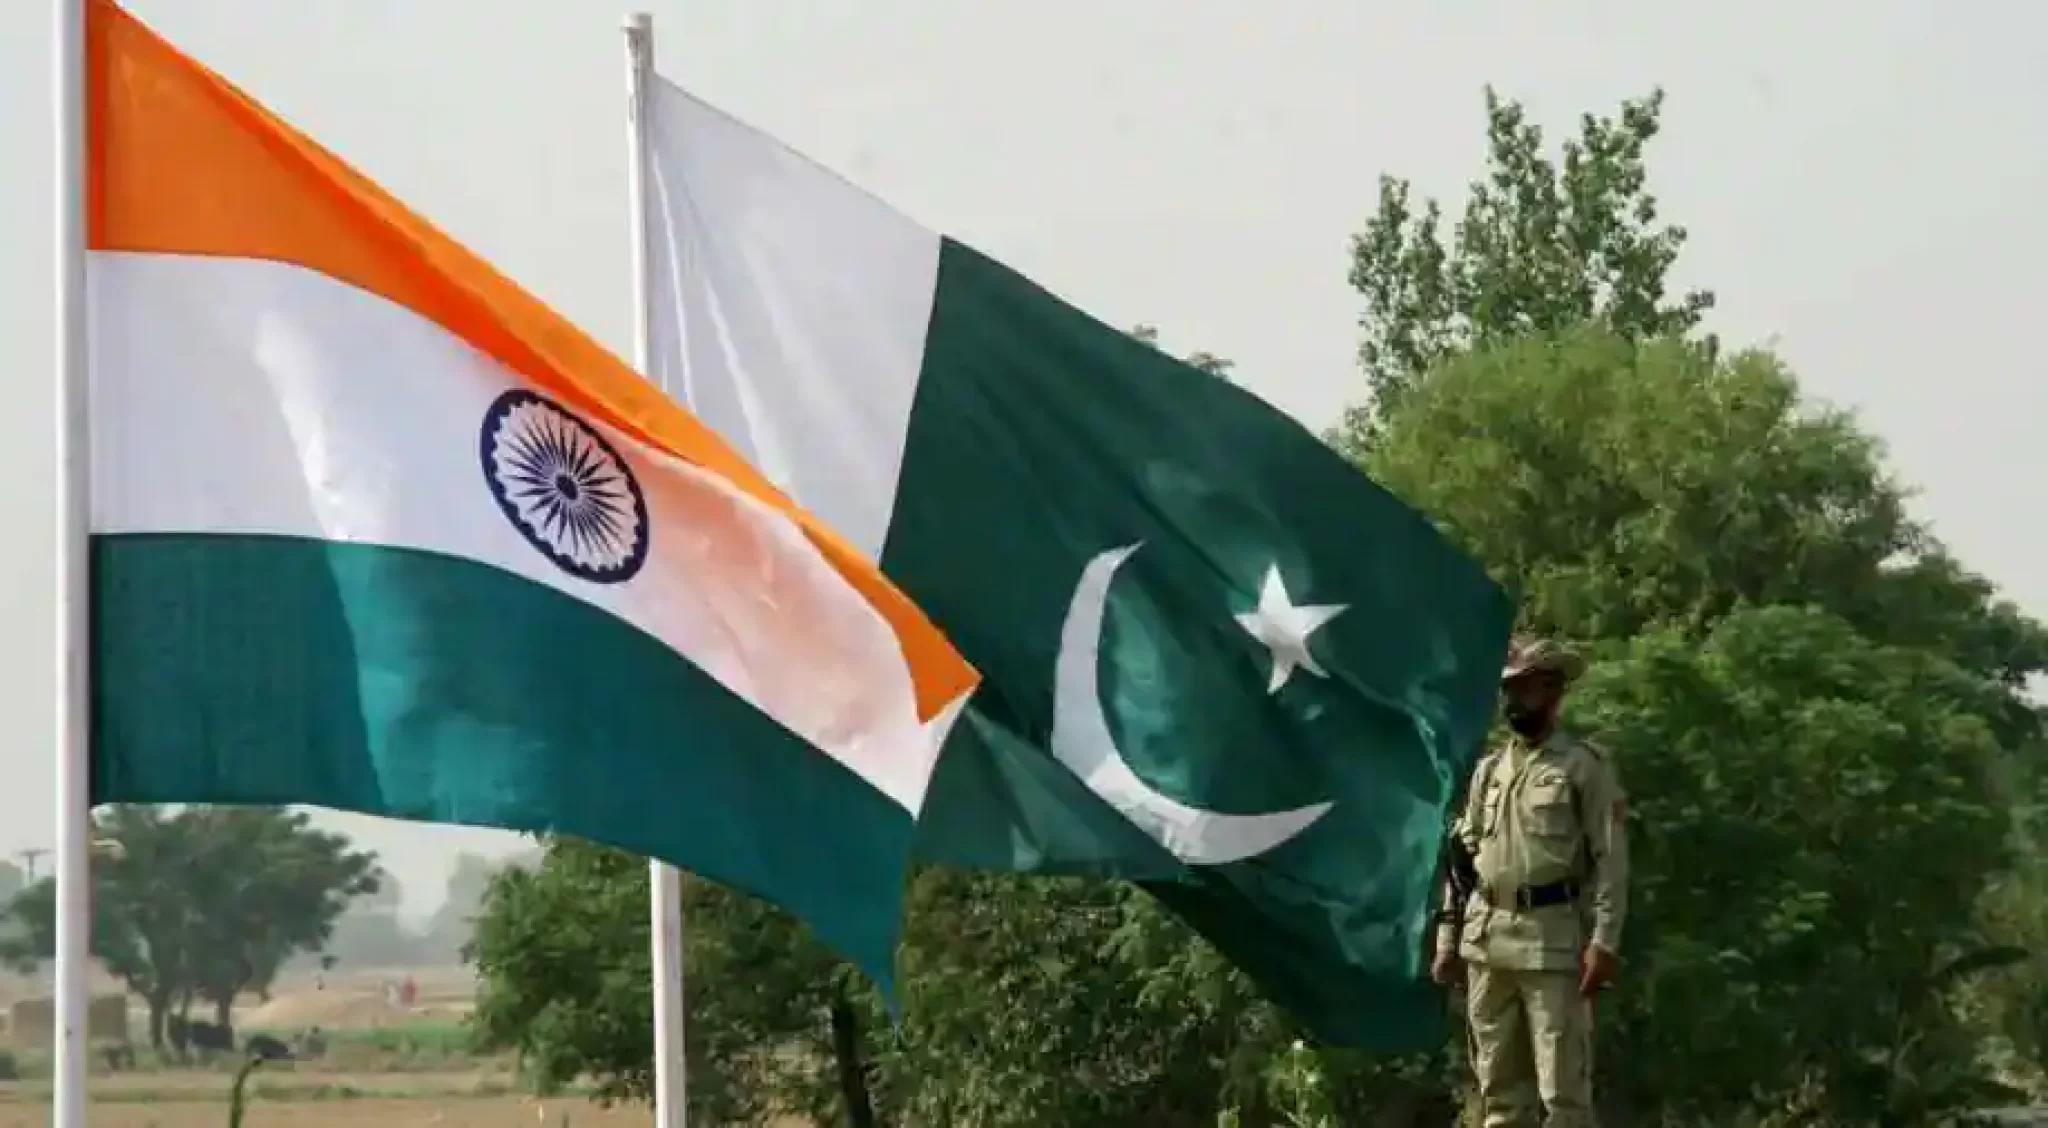 Despite UAE’s efforts, Indo-Pak relations likely to remain rocky